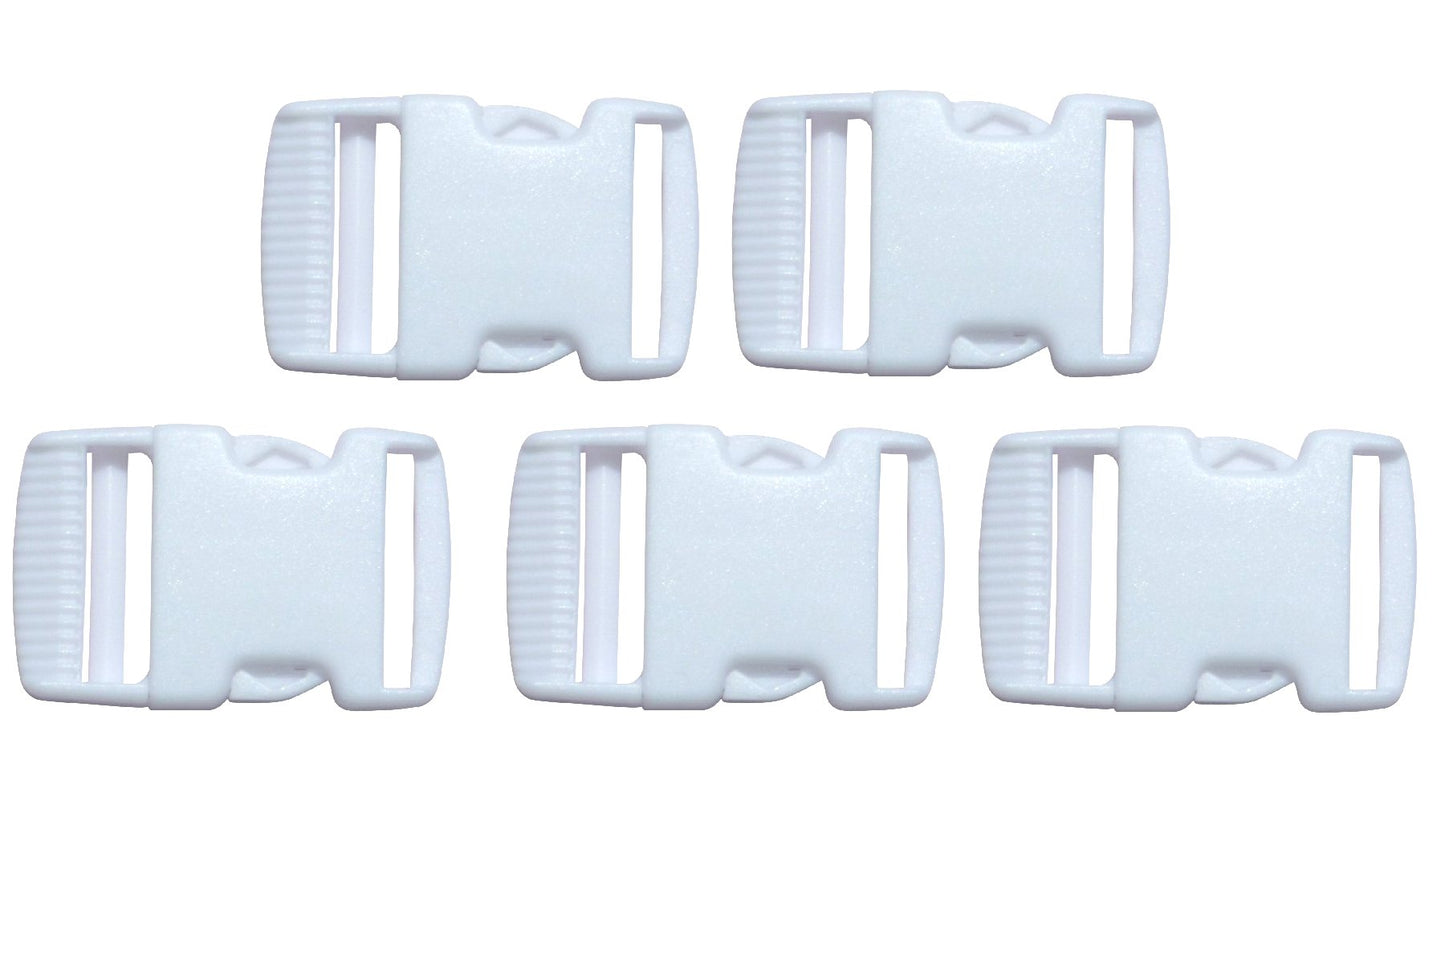 Benristraps 38mm plastic quick release buckle in white (pack of 5)